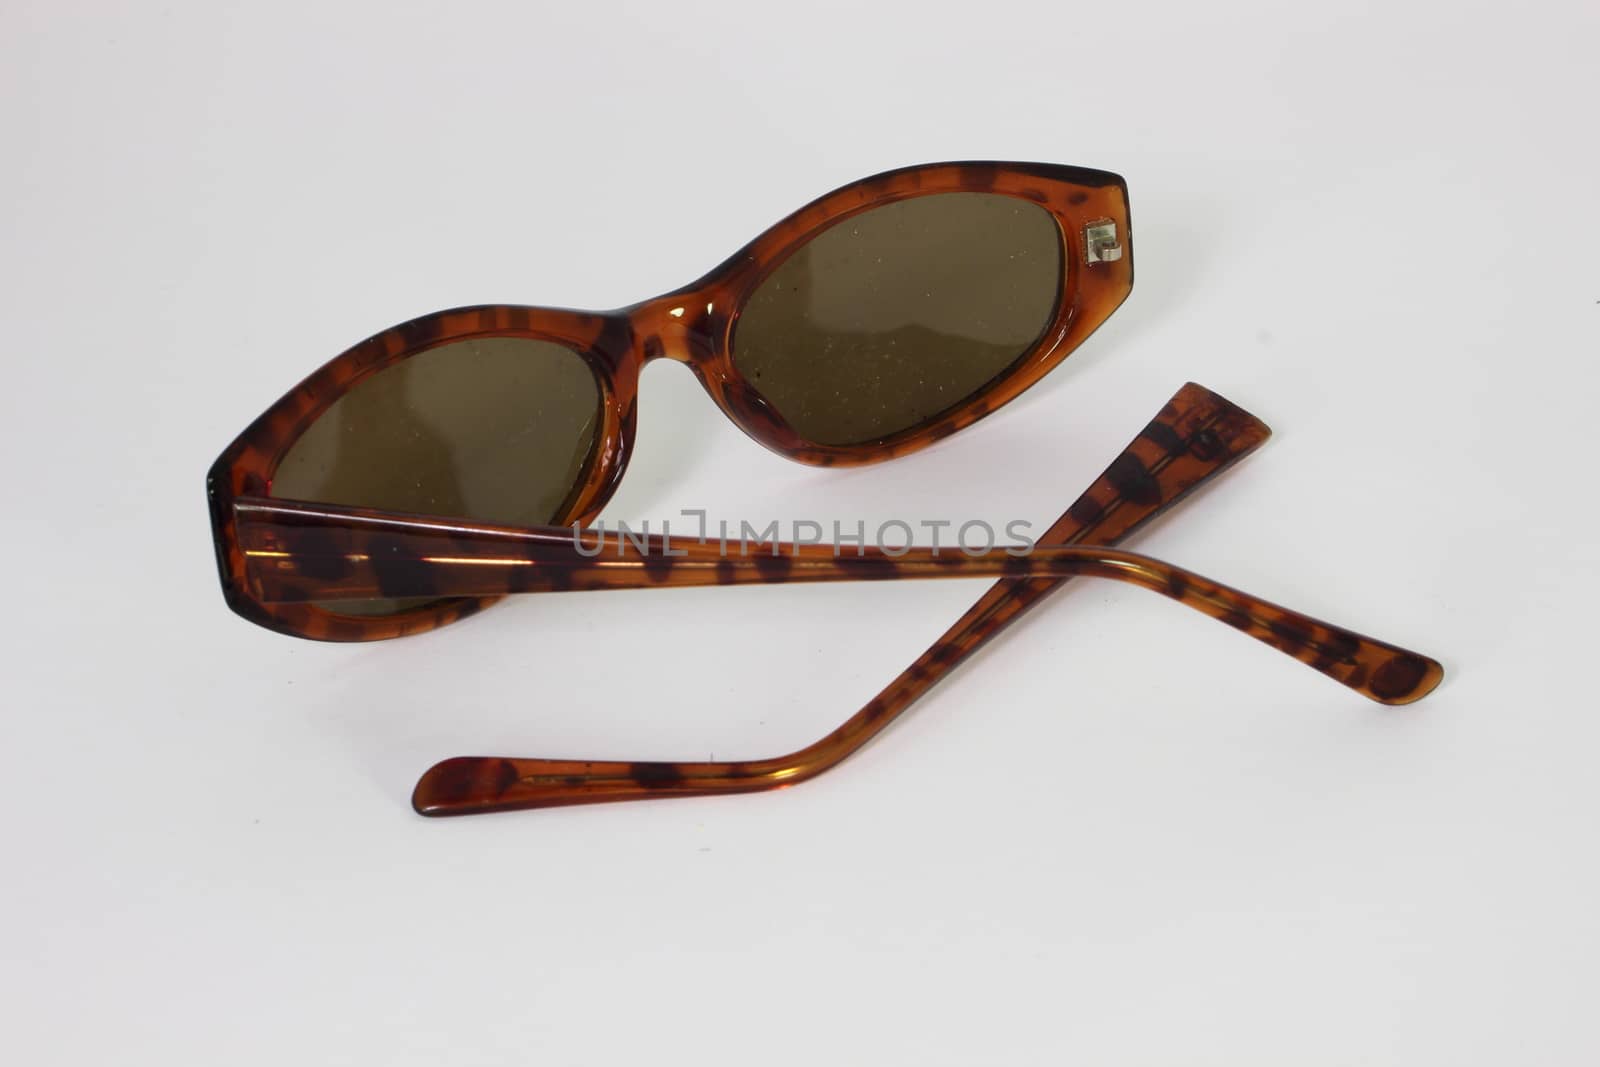 Broken sunglasses  with frame apart - isolated